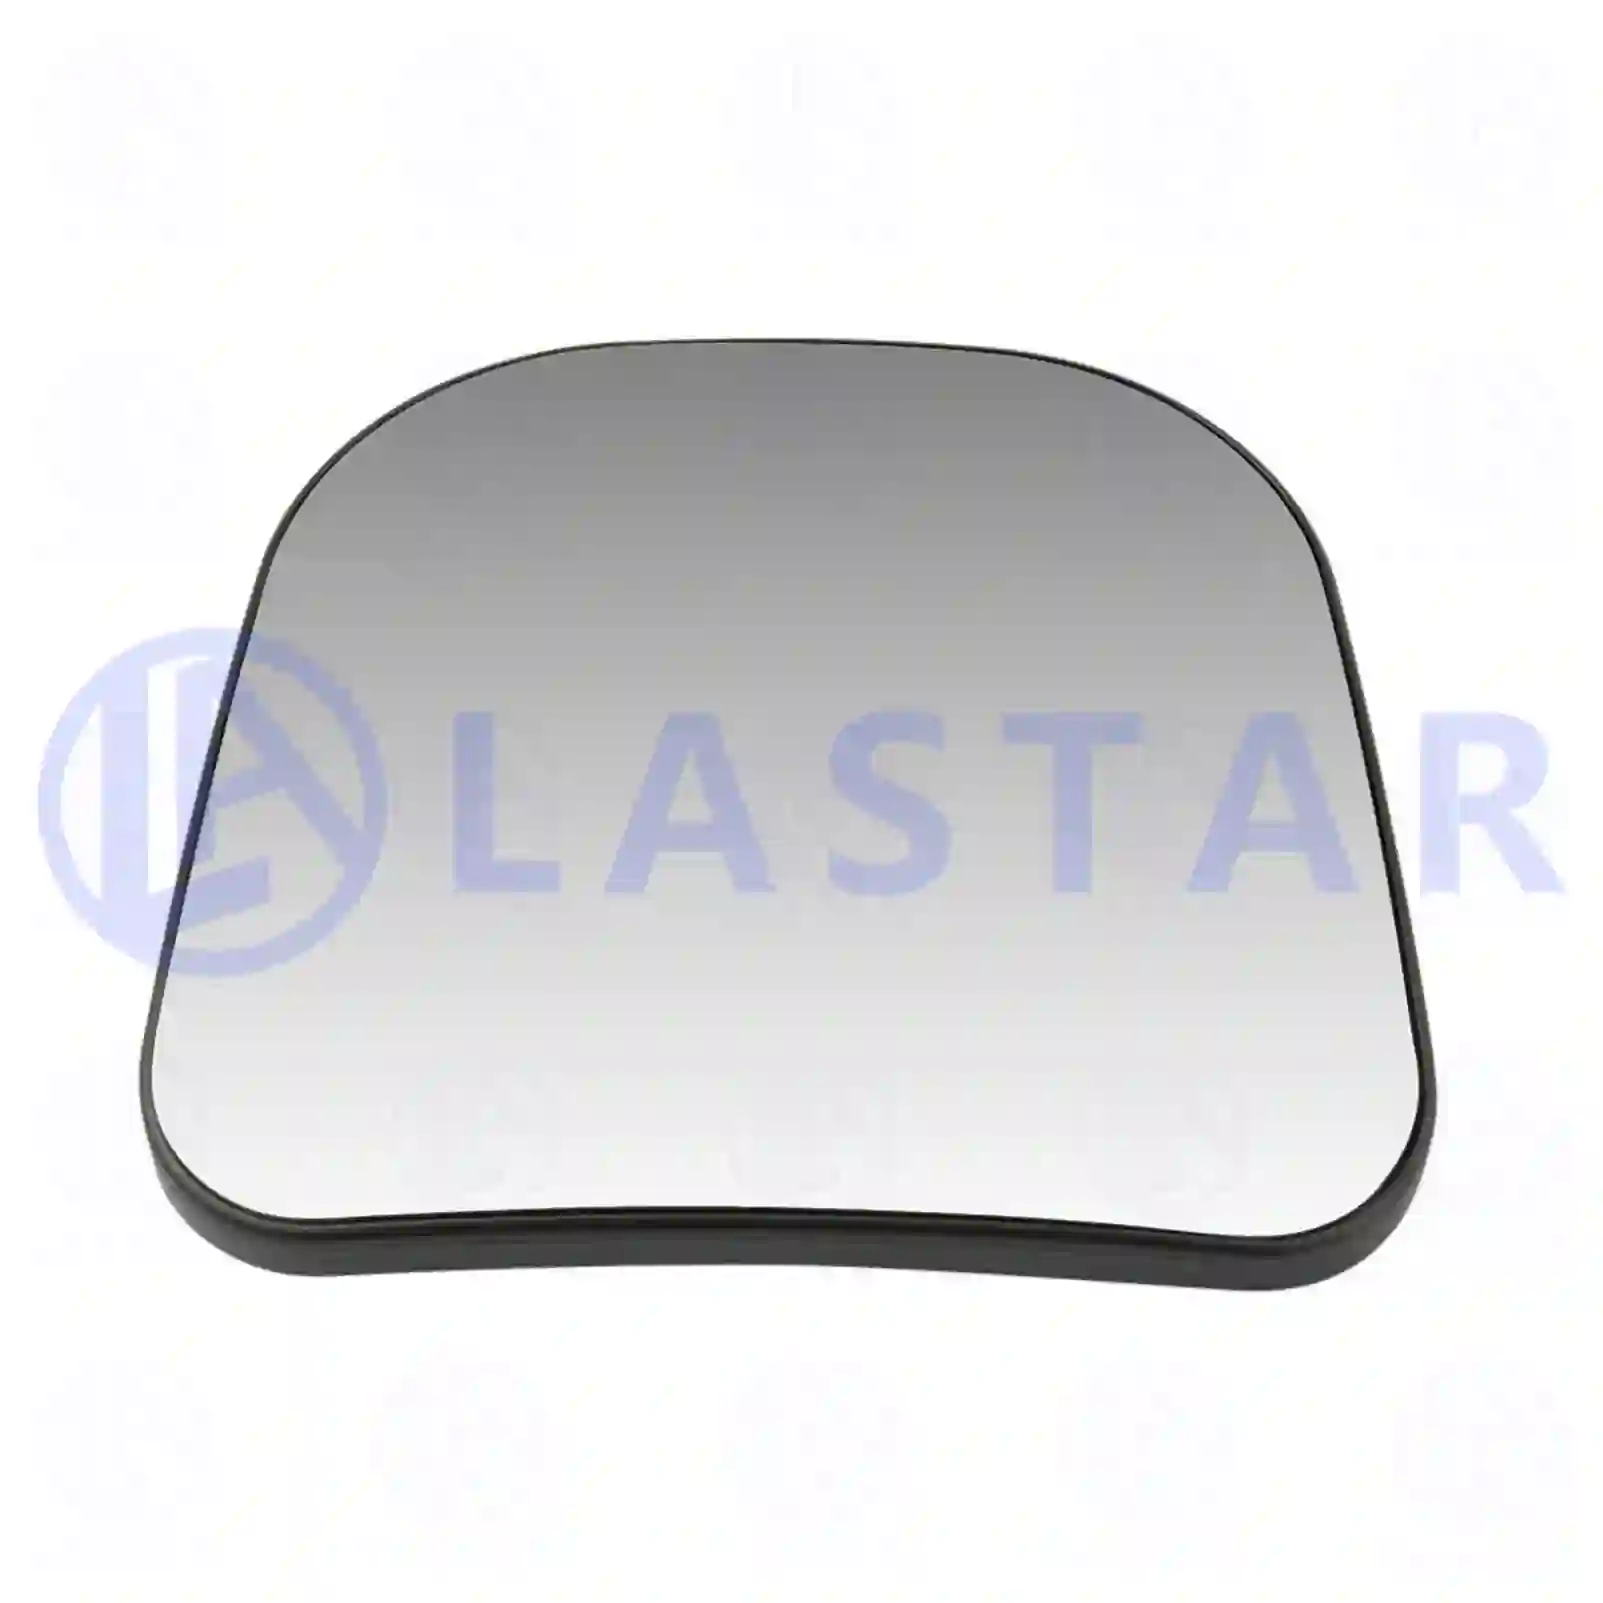 Mirror glass, wide view mirror, heated, 77721626, 1527771, 1767265, ZG61015-0008 ||  77721626 Lastar Spare Part | Truck Spare Parts, Auotomotive Spare Parts Mirror glass, wide view mirror, heated, 77721626, 1527771, 1767265, ZG61015-0008 ||  77721626 Lastar Spare Part | Truck Spare Parts, Auotomotive Spare Parts